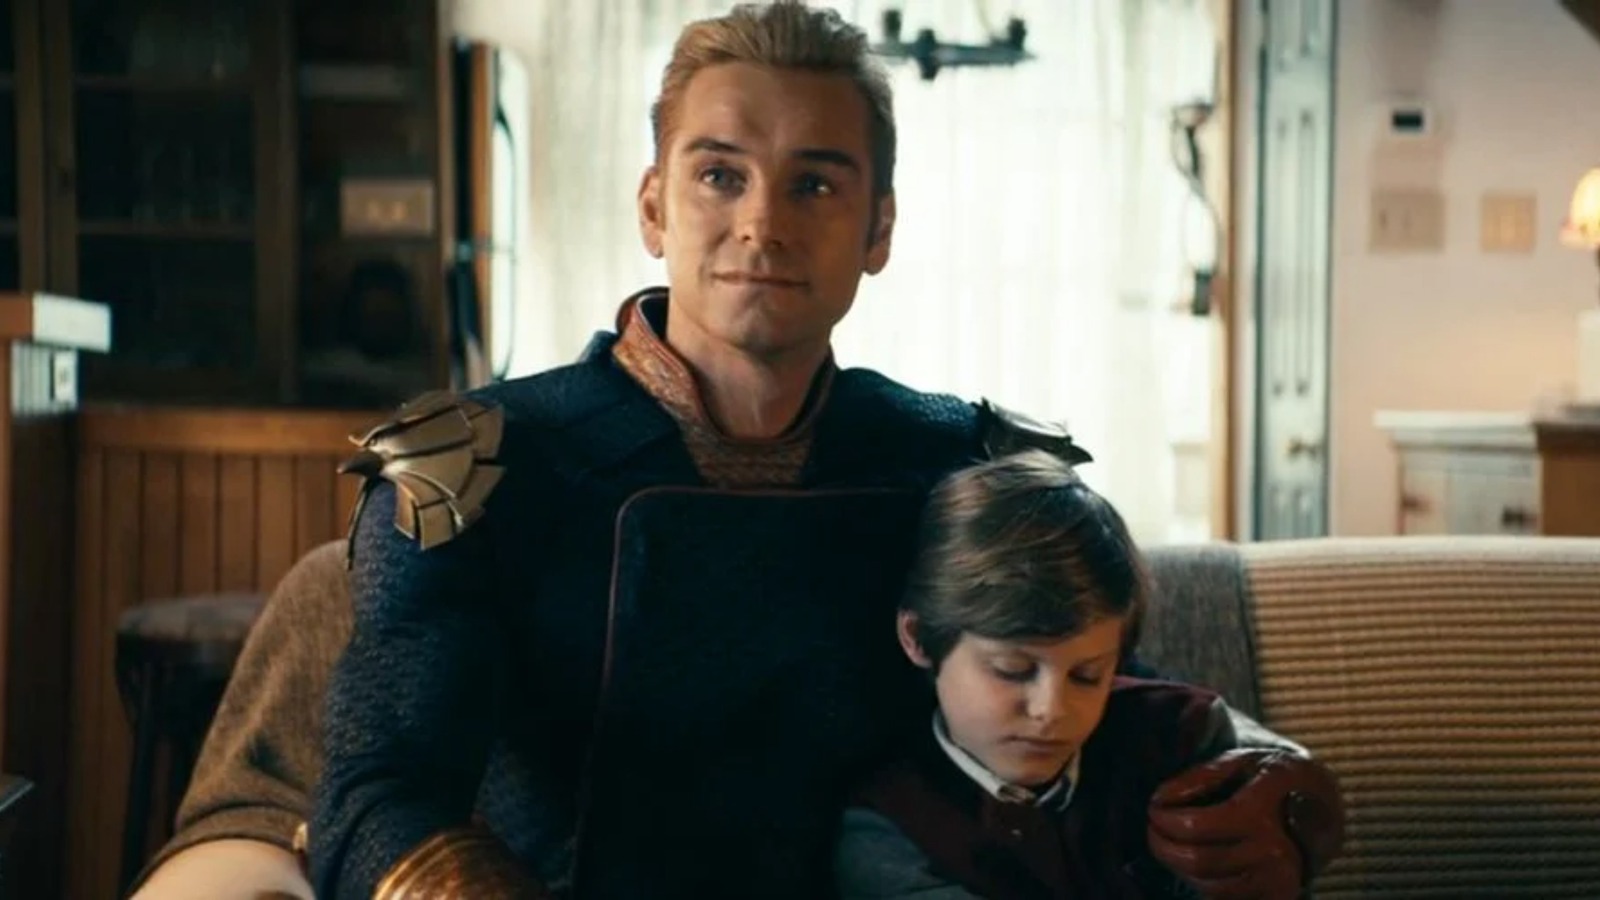 Homelander’s love for Ryan is genuine and their father-son relationship is his only remaining human quality